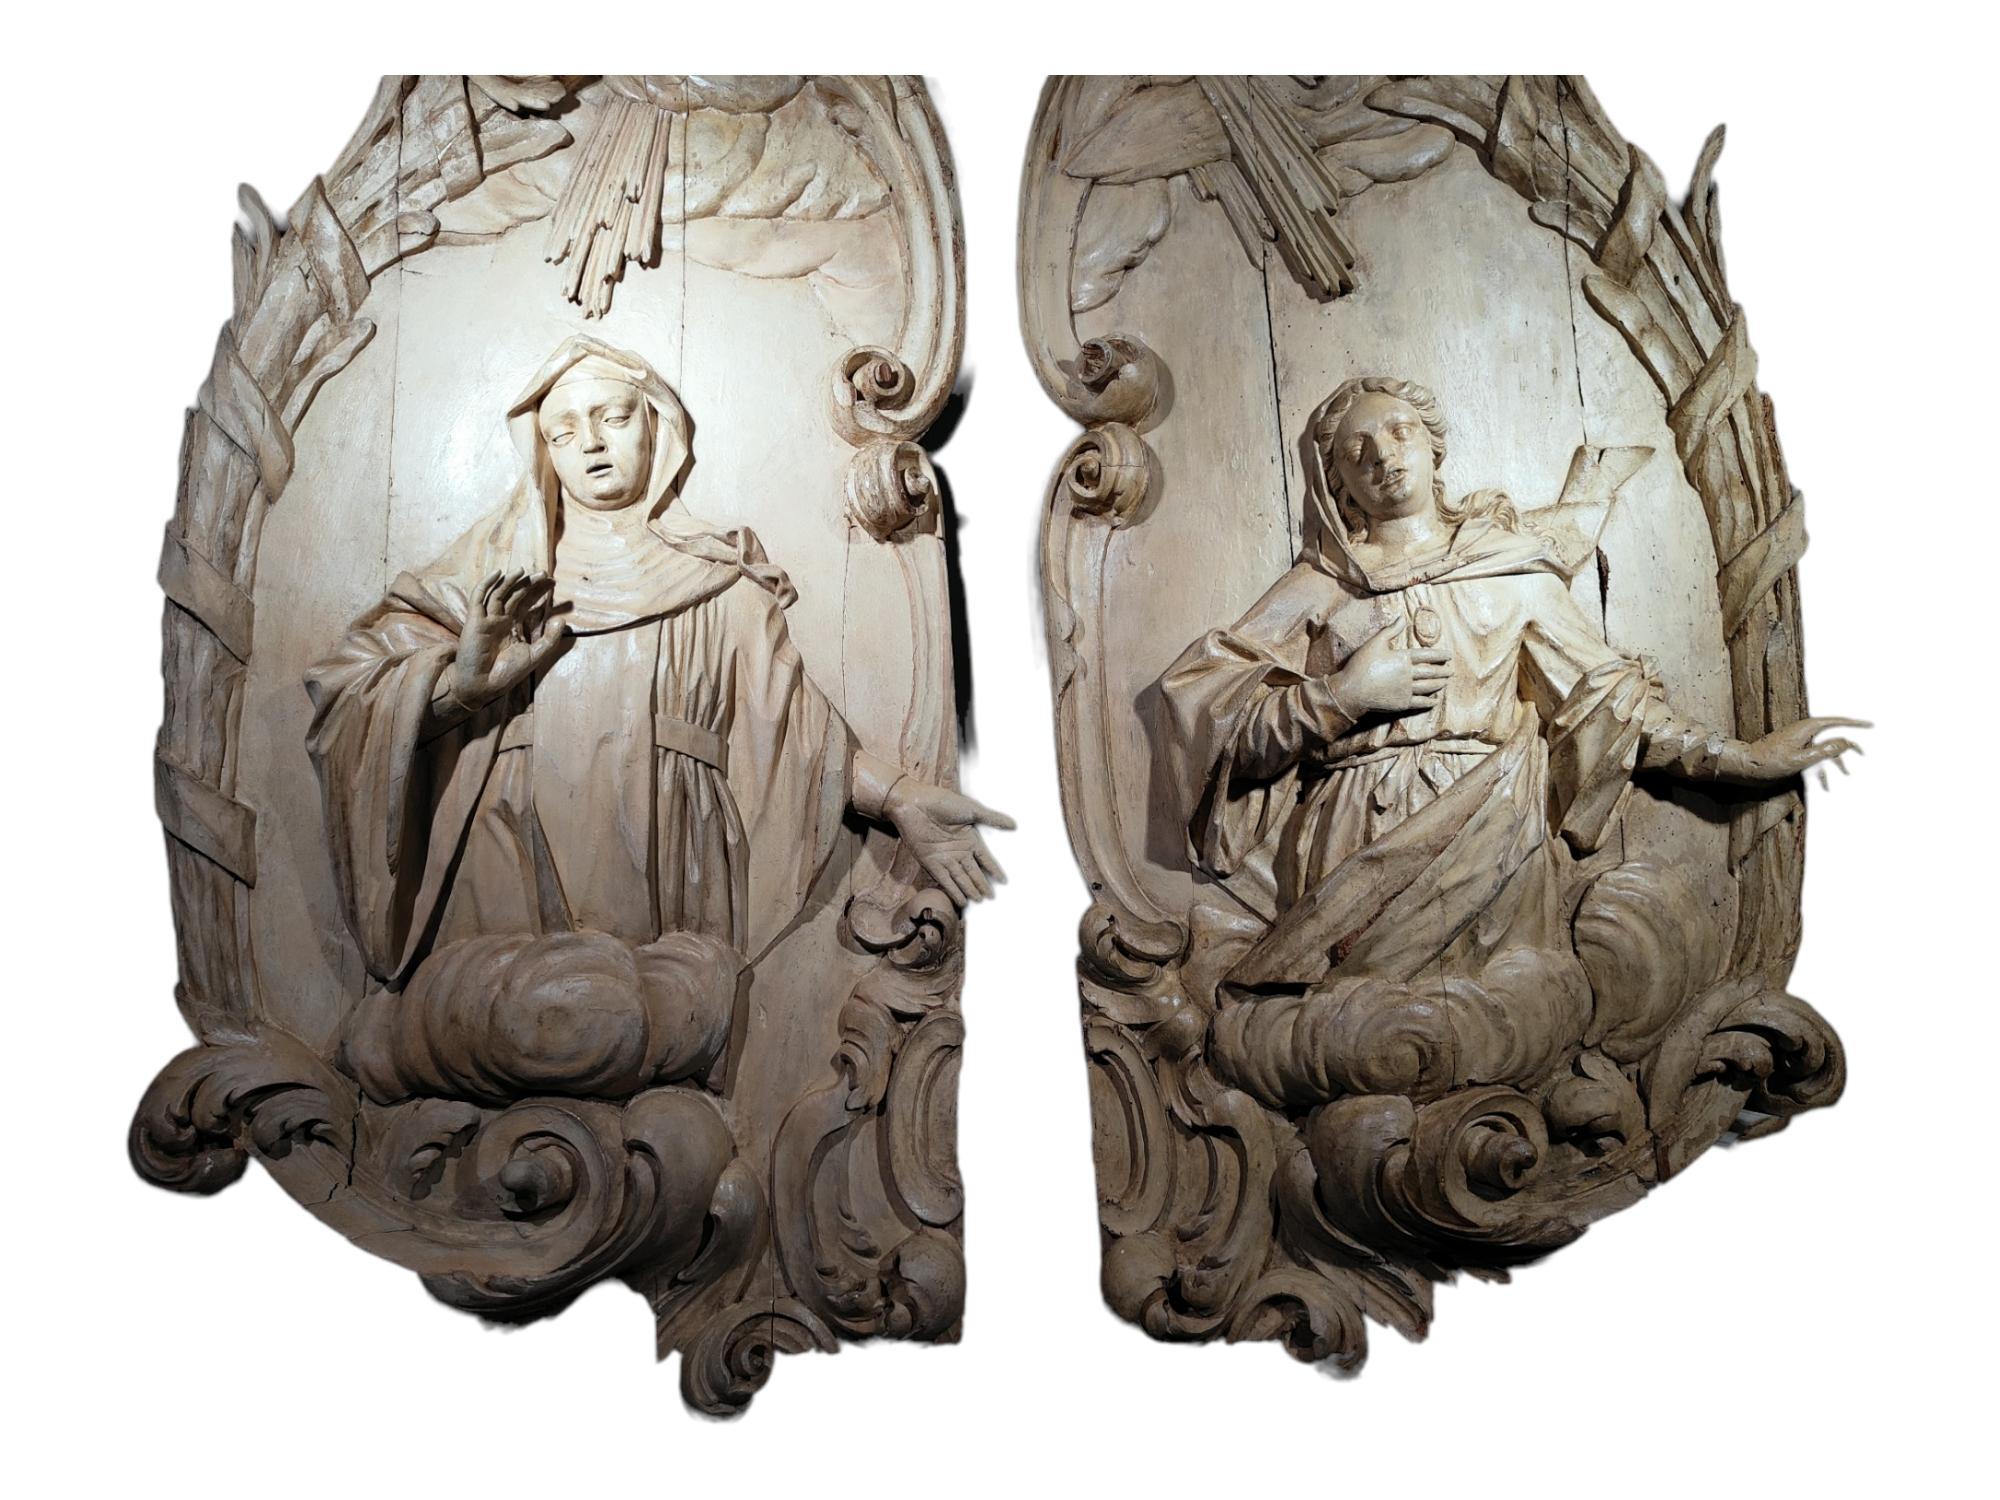 PAIR OF MONUMENTAL CARVED PANELS FROM THE 18TH CENTURY
IMPORTANT SPANISH BAROQUE 18TH CENTURY WOODEN PANELS ATTRIBUTED TO: Luis Bonifás y Massó-Valls, 1730 - Valls, 1786) was a Spanish sculptor and one of the leading exponents of Catalan Baroque